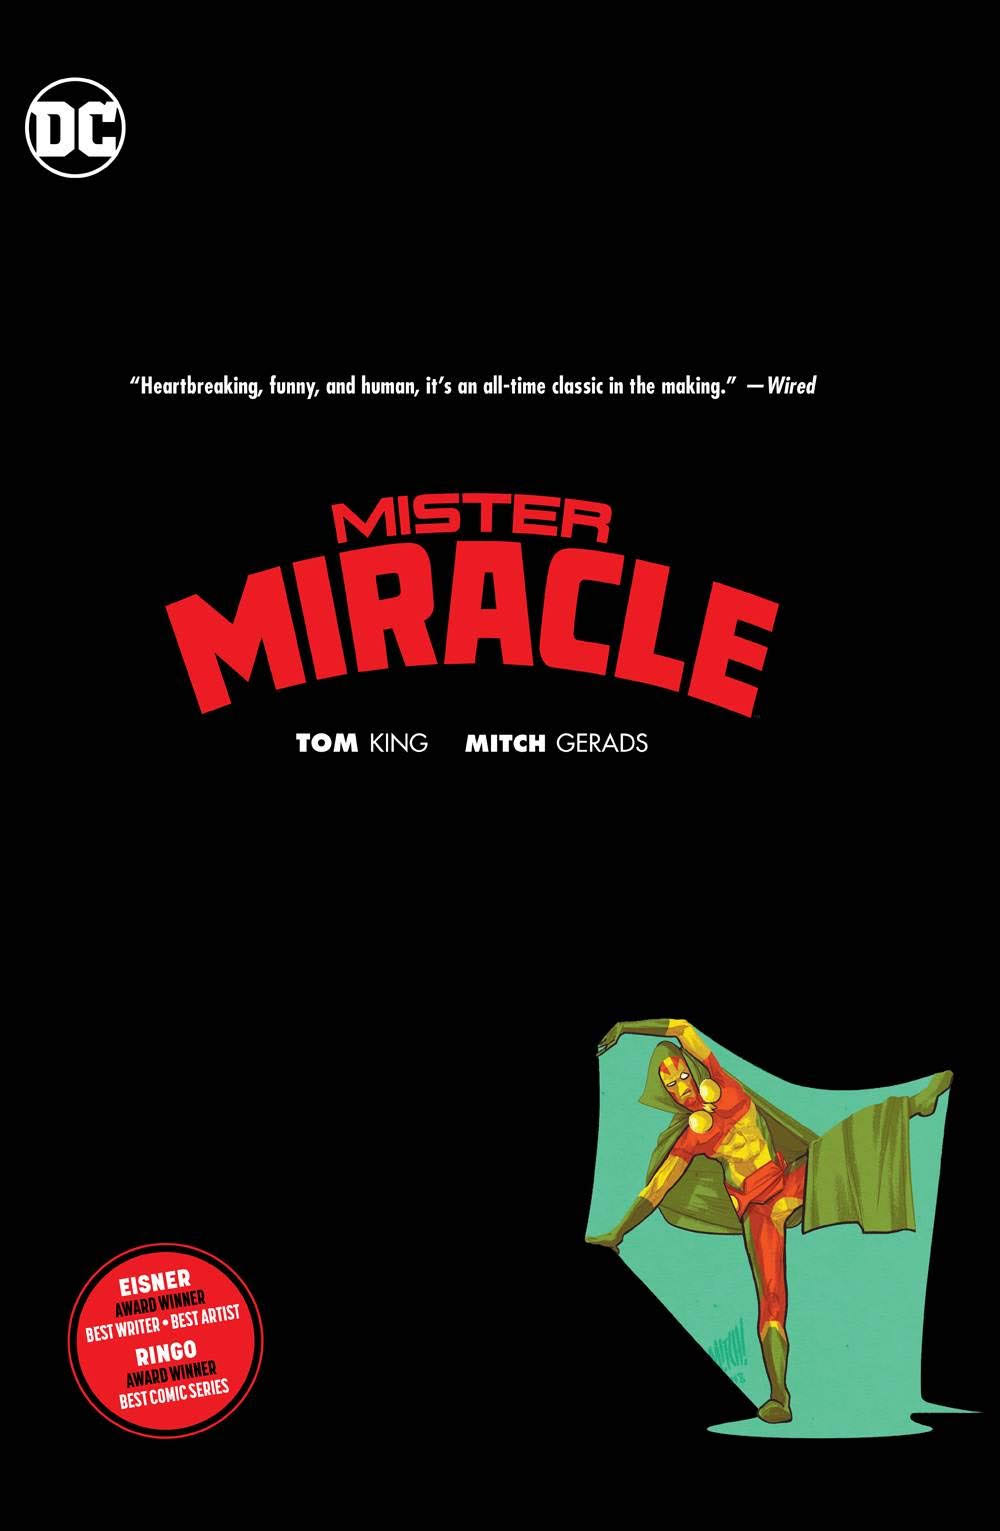 Mister Miracle by Tom King & Mitch Gerads Hardcover - DC Comics